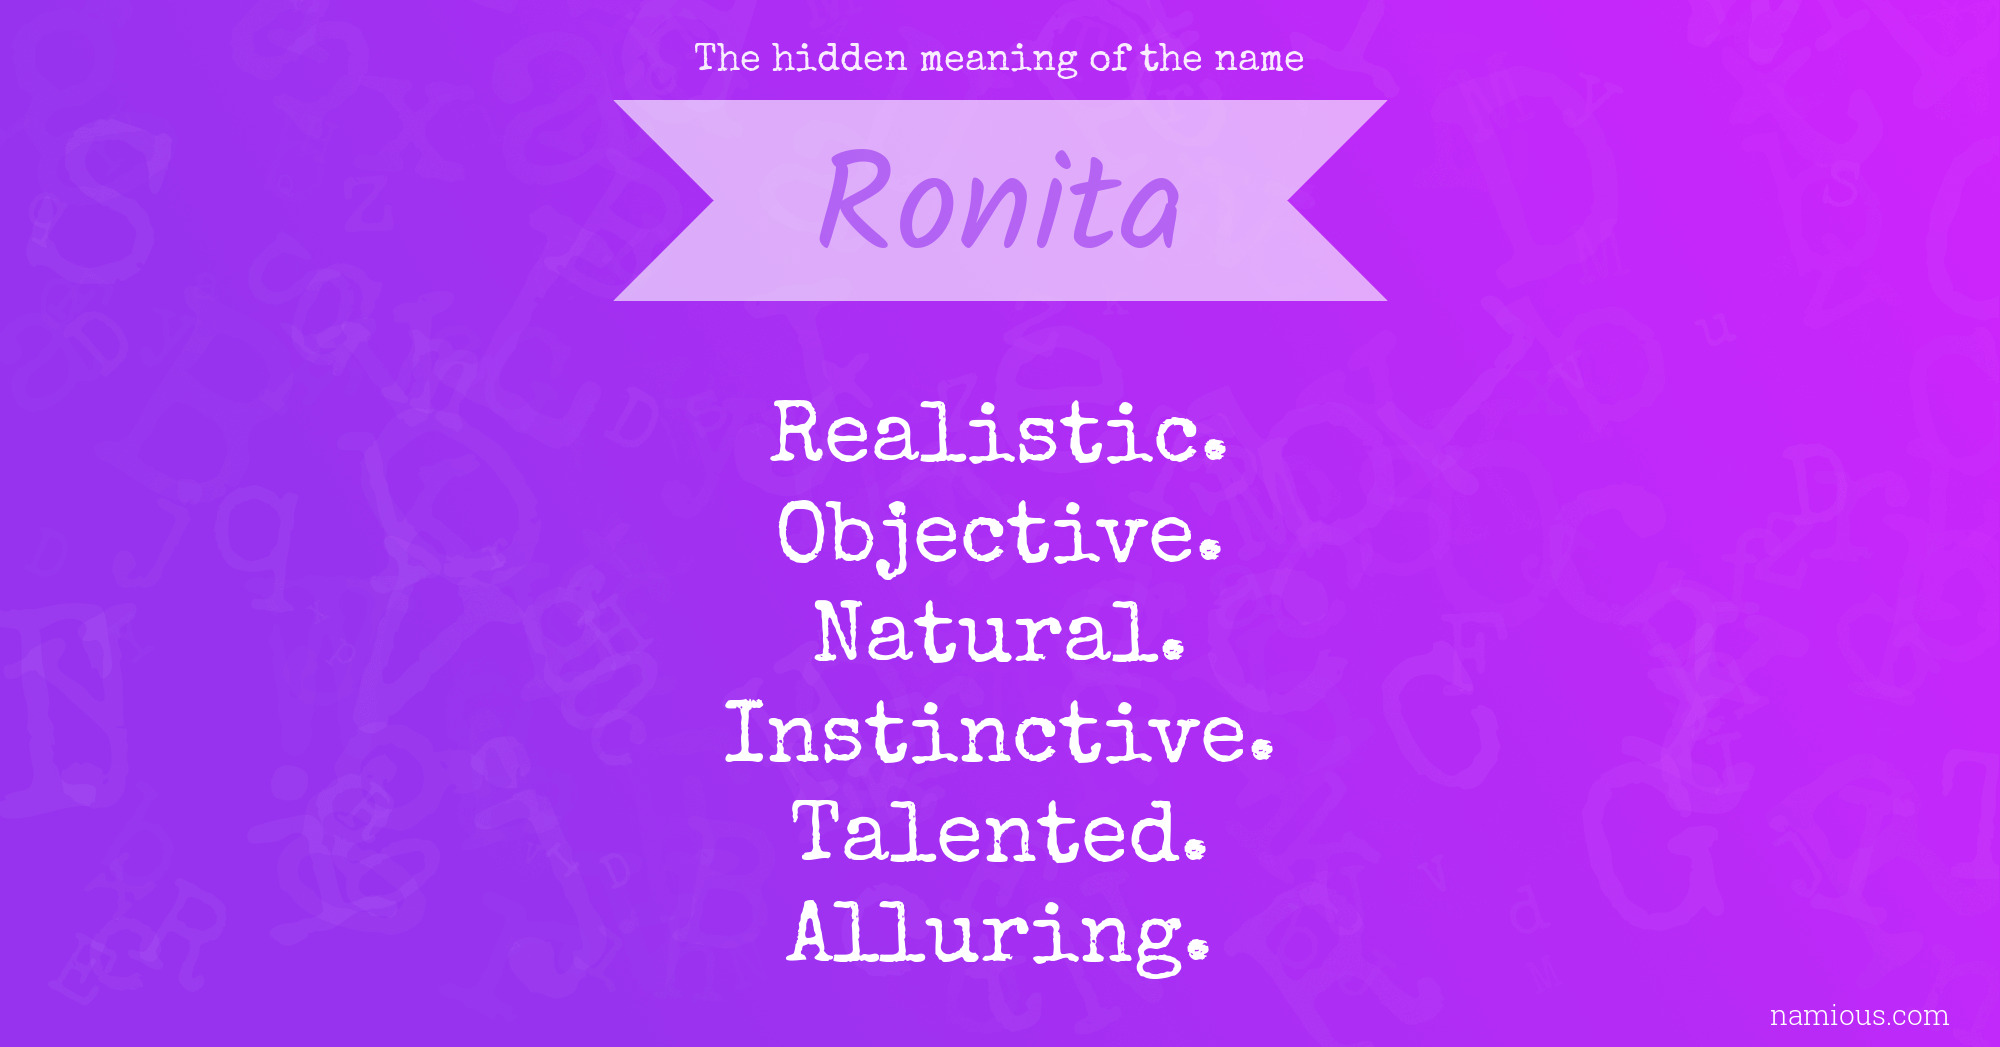 The hidden meaning of the name Ronita